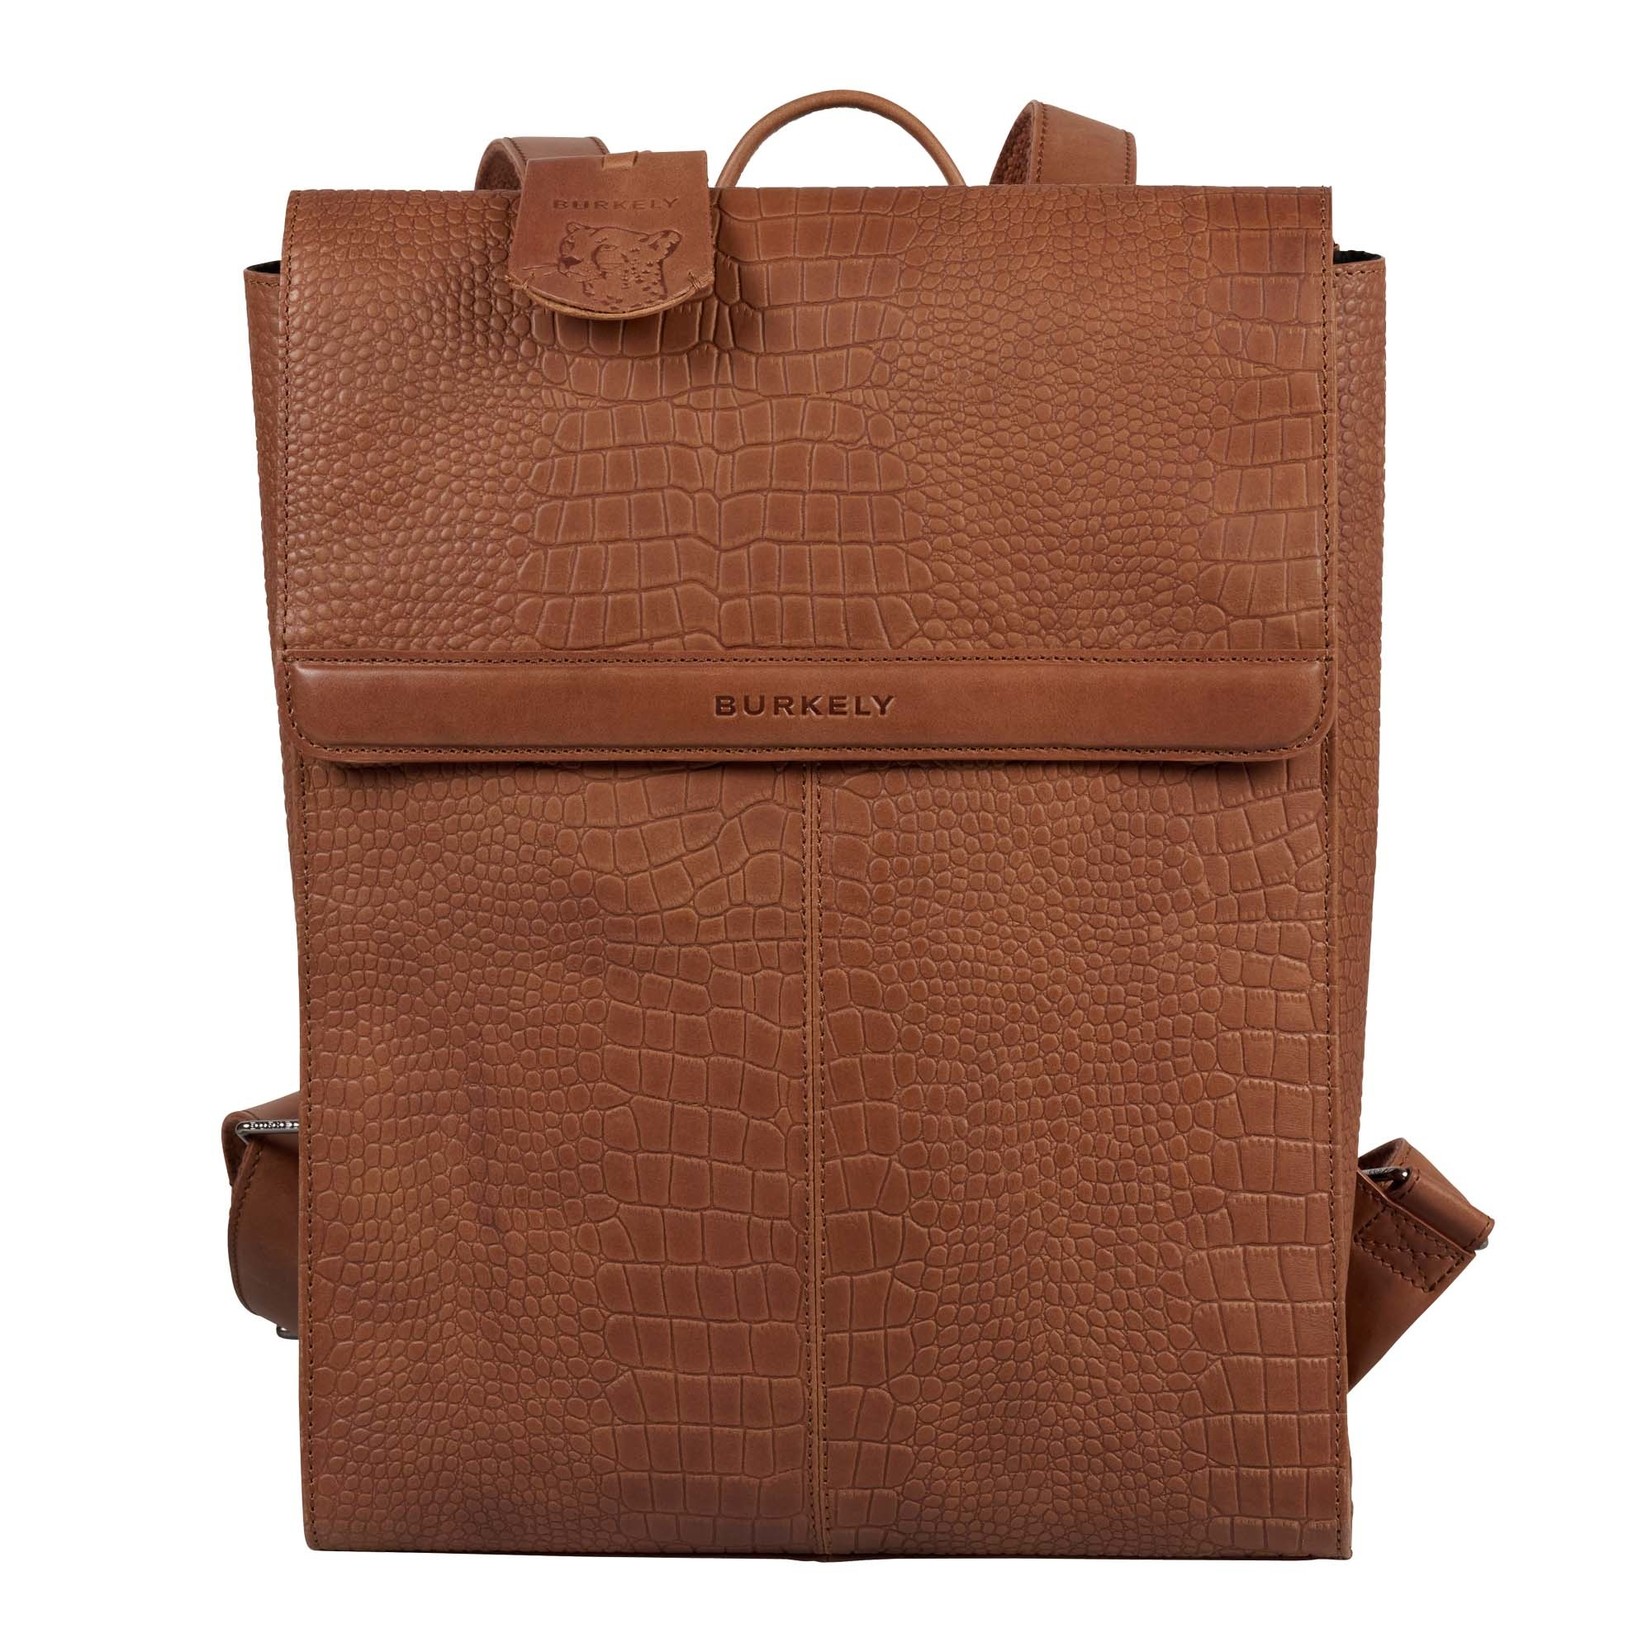 Burkely Burkely Carly Backpack 14" Cognac